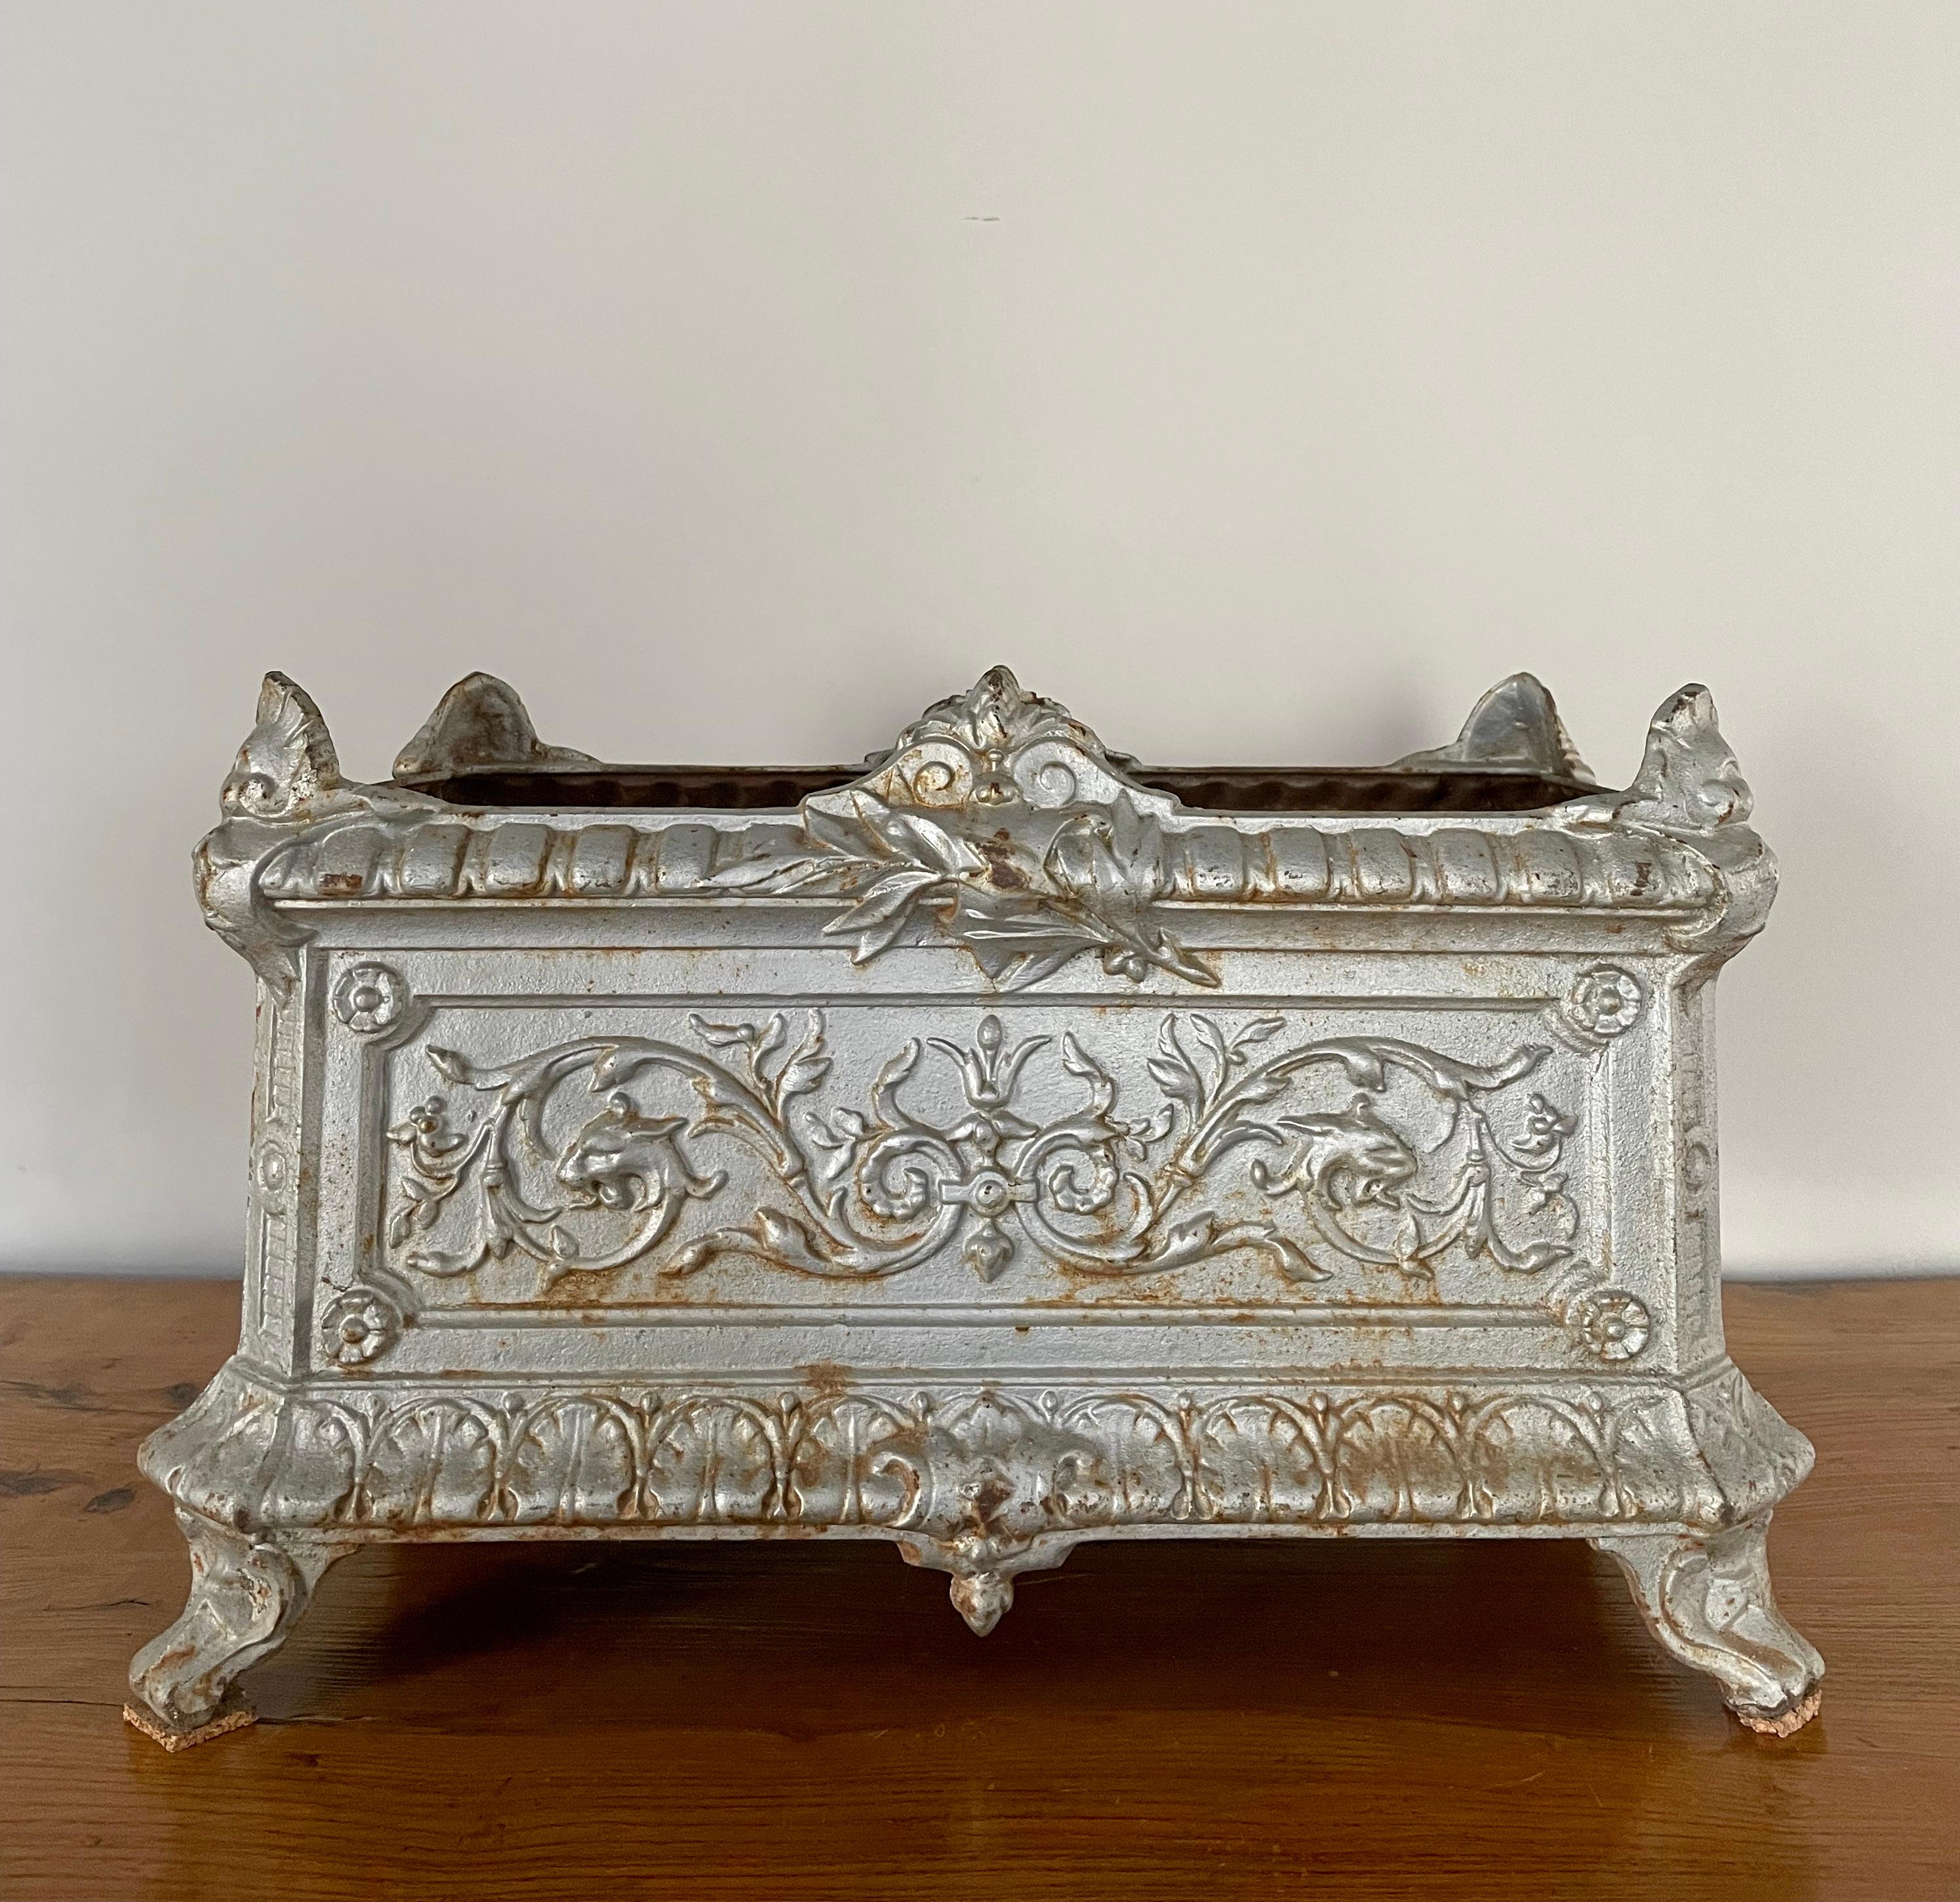 This is a fabulous French 19th Century jardinière in its original silver paint, but sadly, it is lacking part of one foot (an inelegant solution is a piece of cork, but we think a new foot could be fashioned from Bondo). It perfectly embodies the